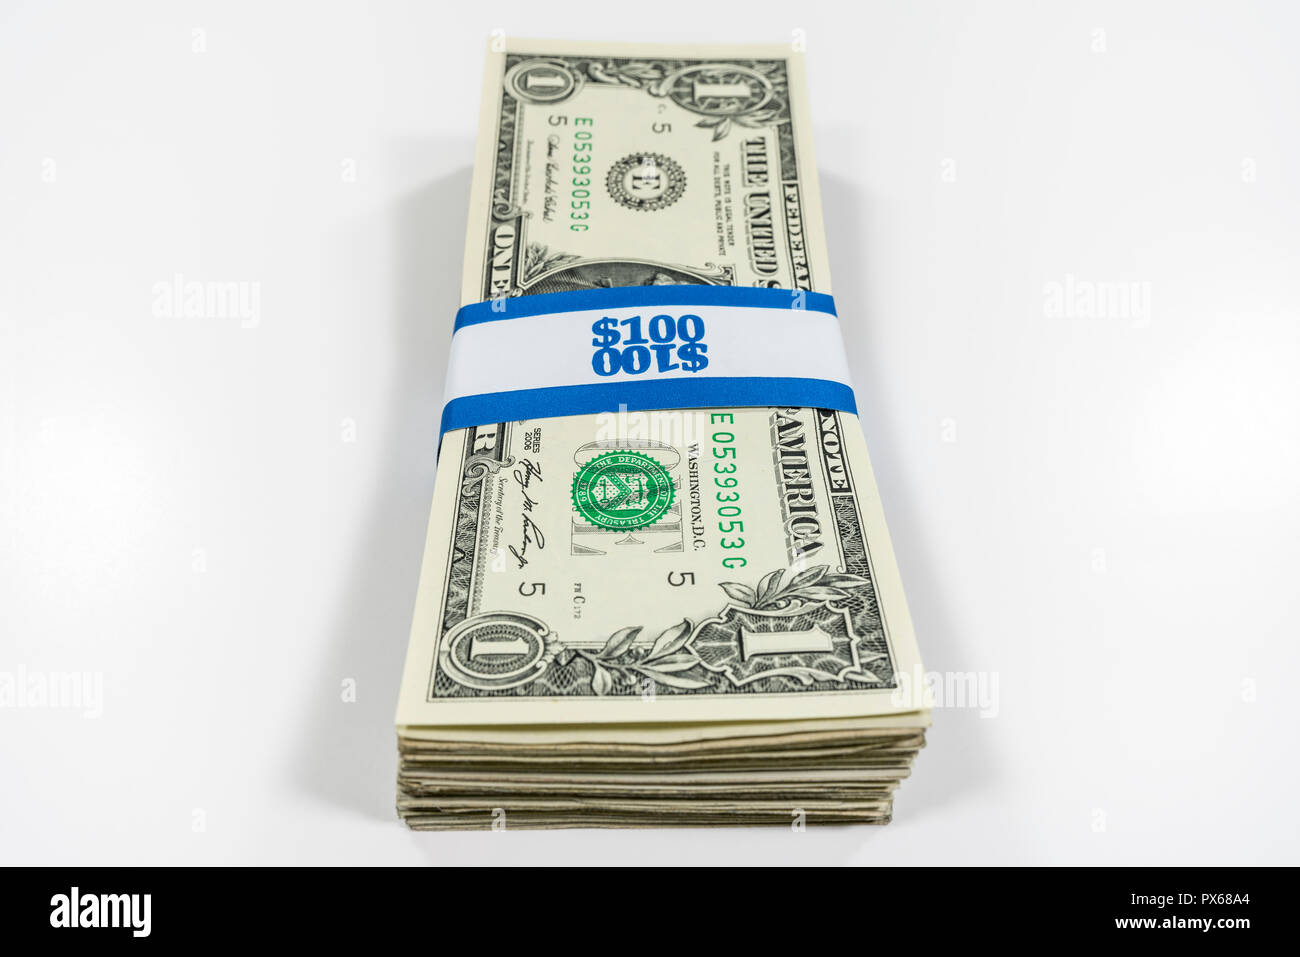 Stack of one dollar bills with $100 paper currency strap. Stock Photo